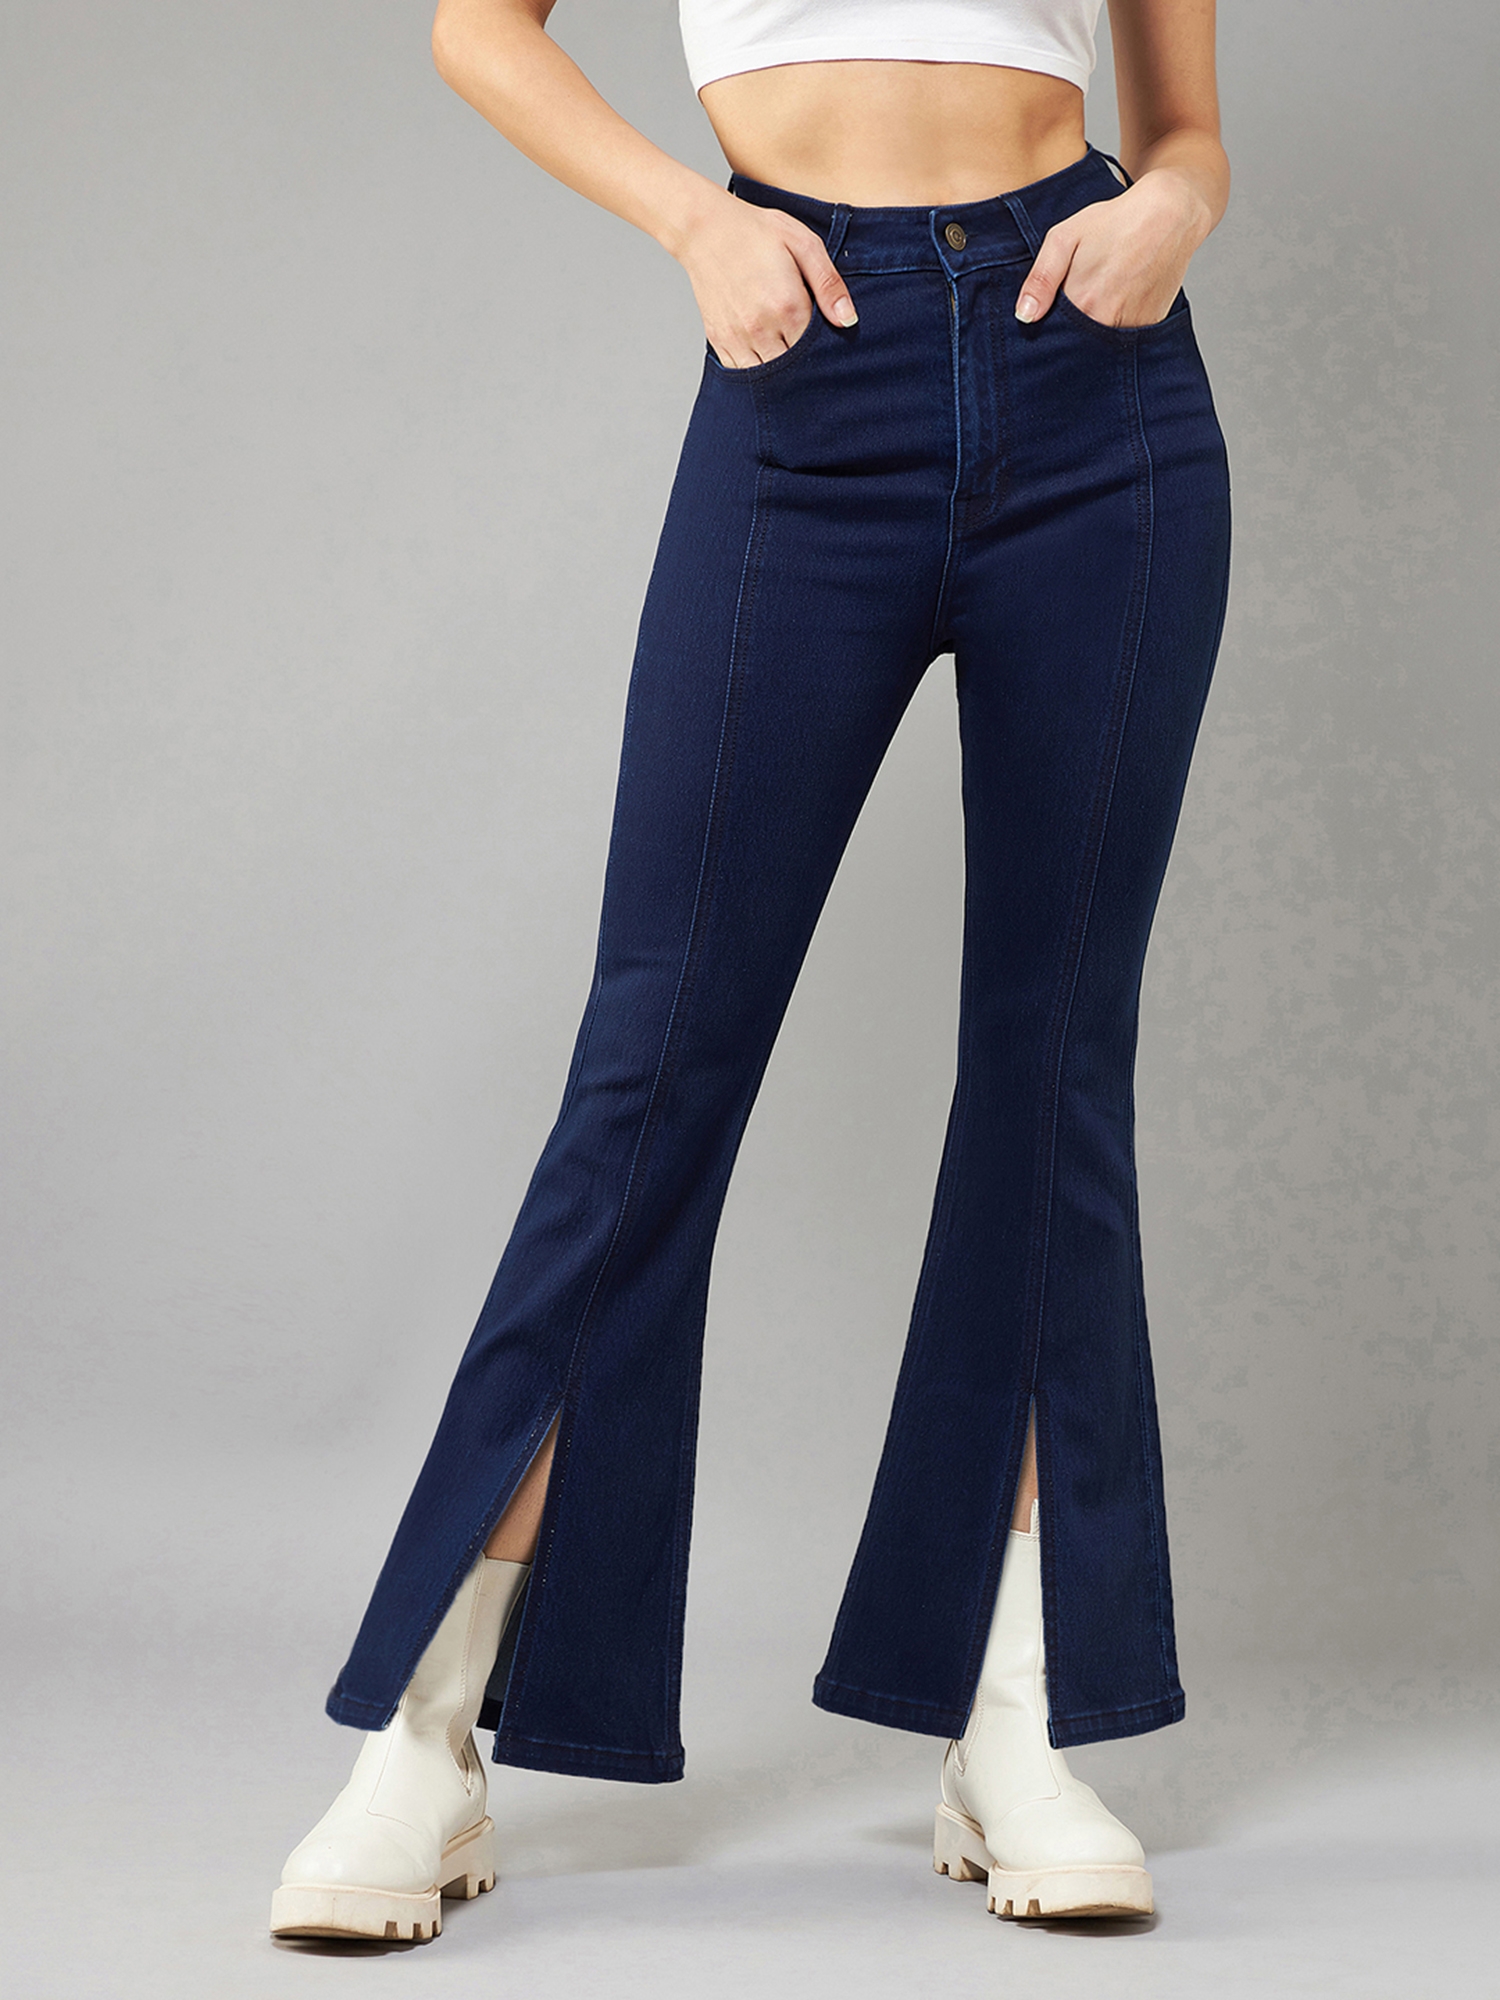 Dolce Crudo | Women's Navy Blue Bootcut High rise Clean look Regular Stretchable Denim Jeans